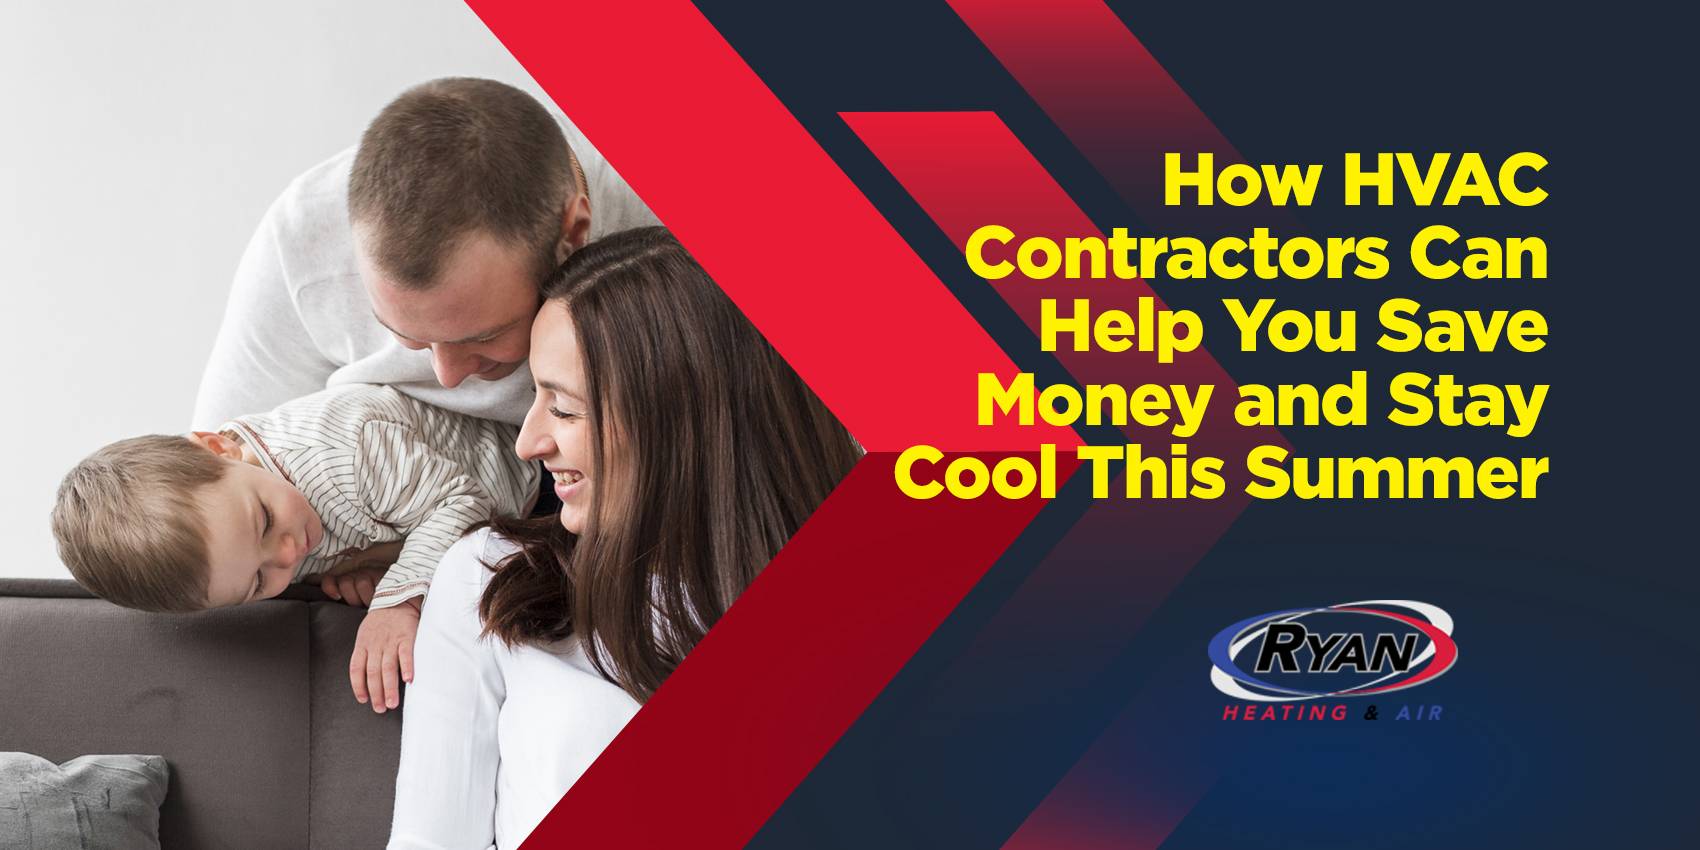 How HVAC Contractors Can Help You Save Money and Stay Cool This Summer with happy family photo